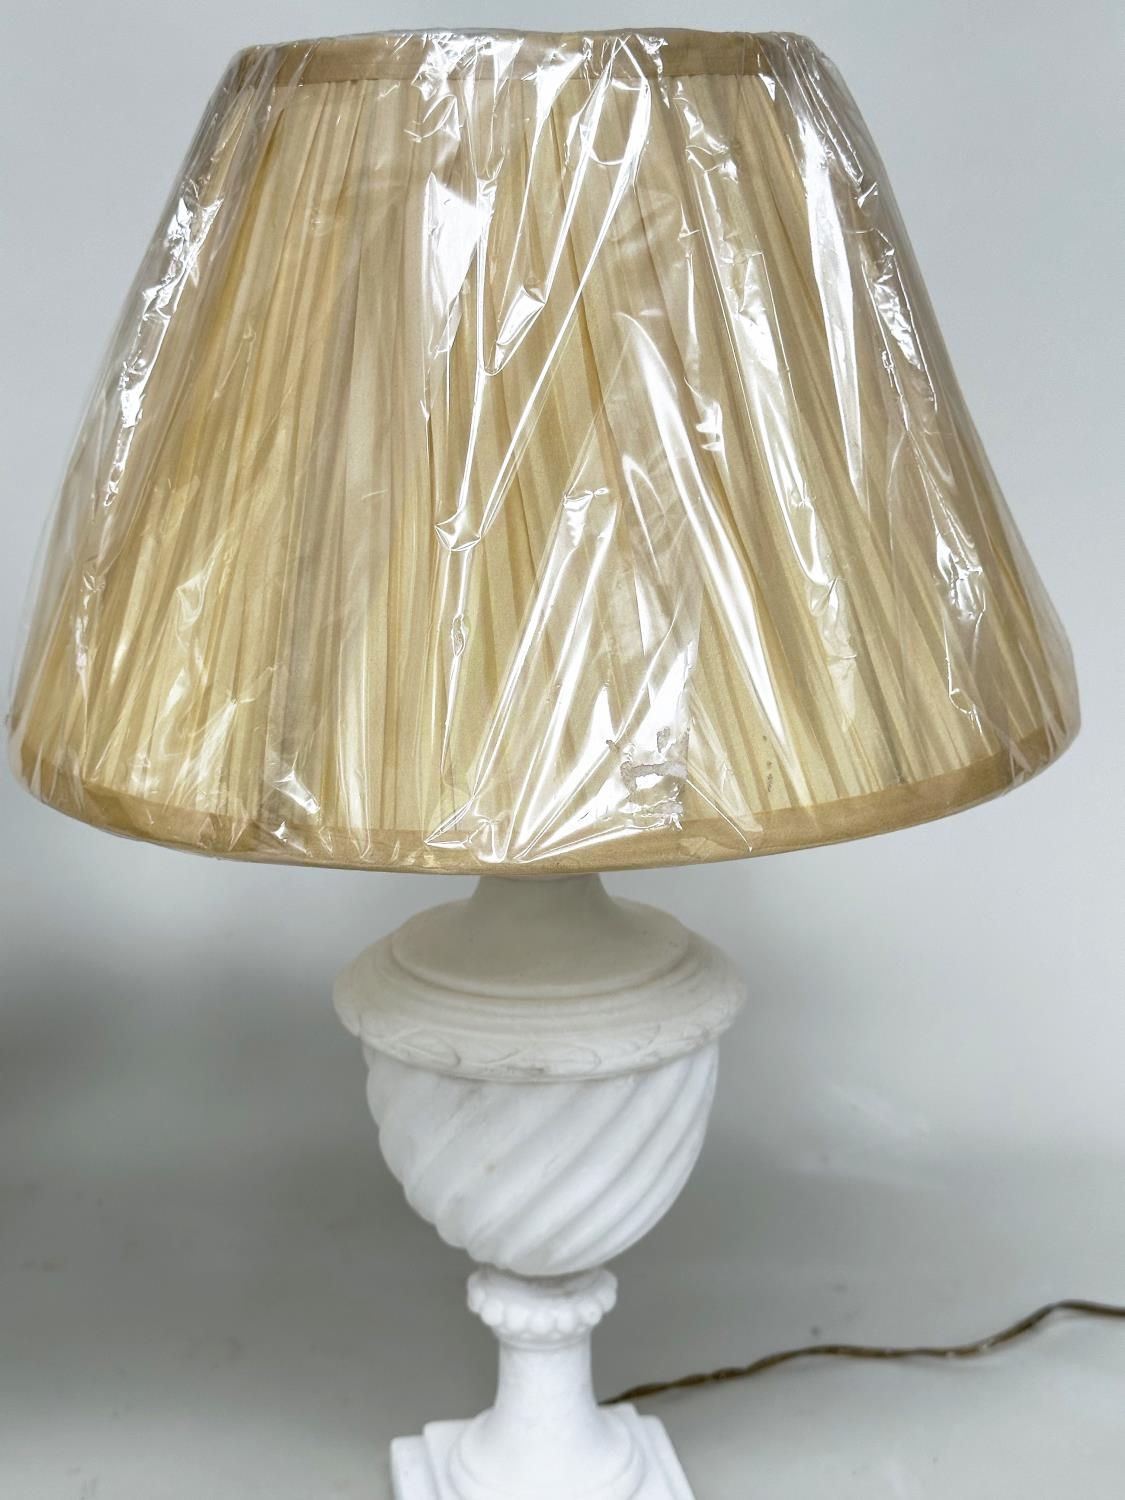 TABLE LAMPS, a pair, Italian alabaster of spiral urn form with stepped square bases and shades, 66cm - Image 4 of 5